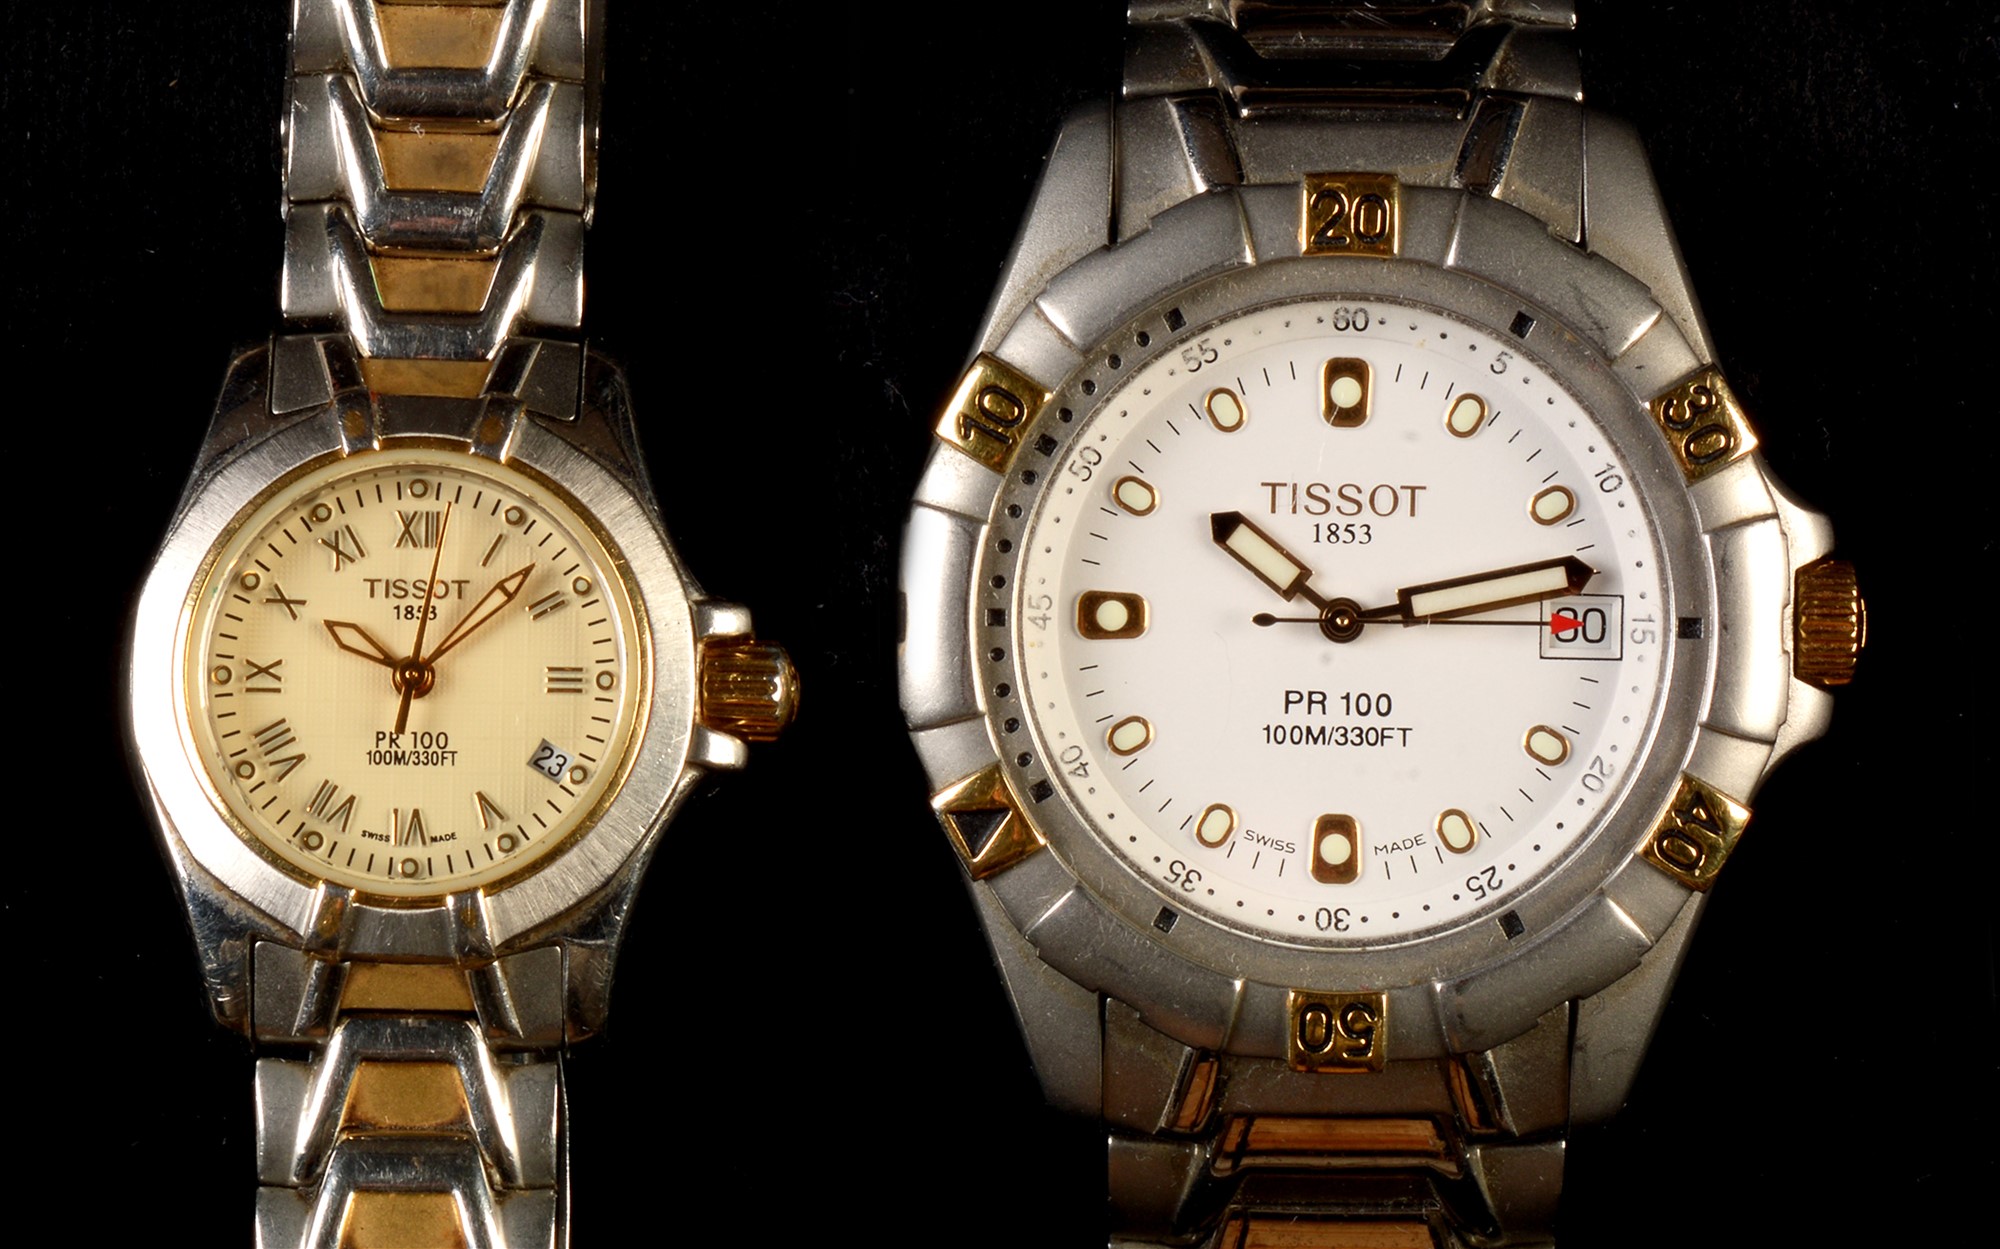 Lady's and gent's Tissot watches.